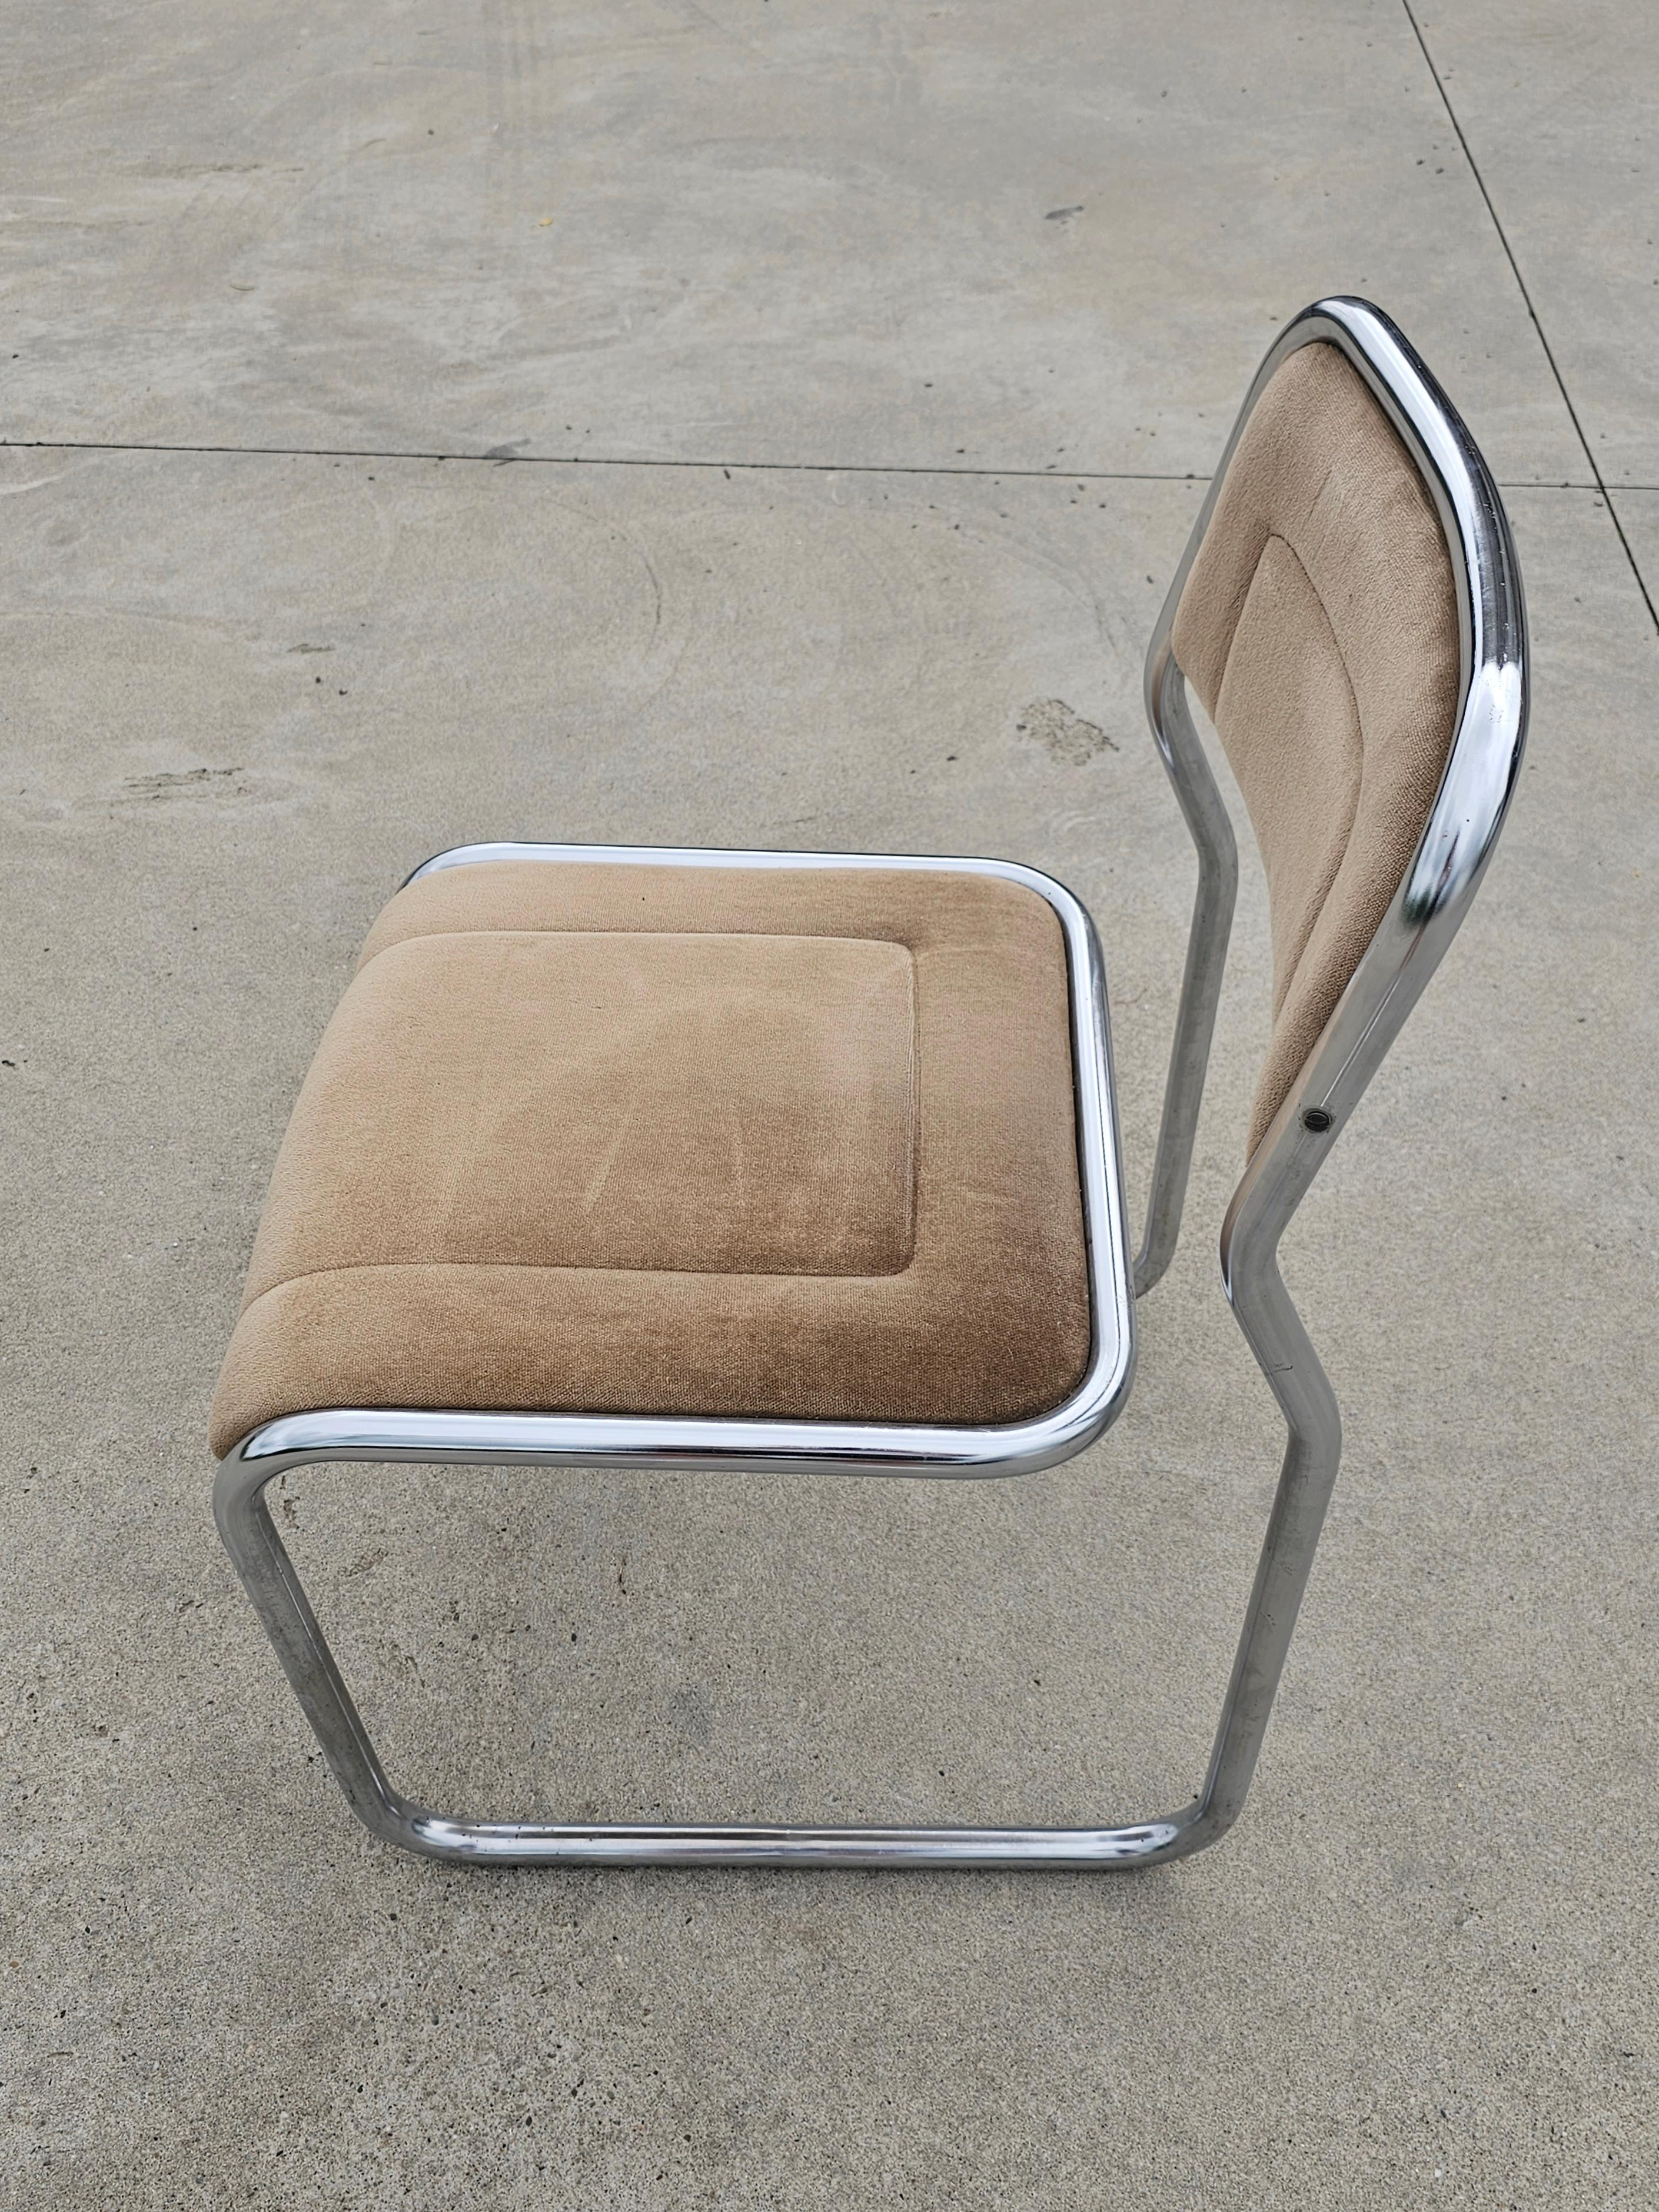 Polychromed 1 of 2 Bauhaus Cantilever Dining Chairs with Infinity Frame, Italy 1970s For Sale